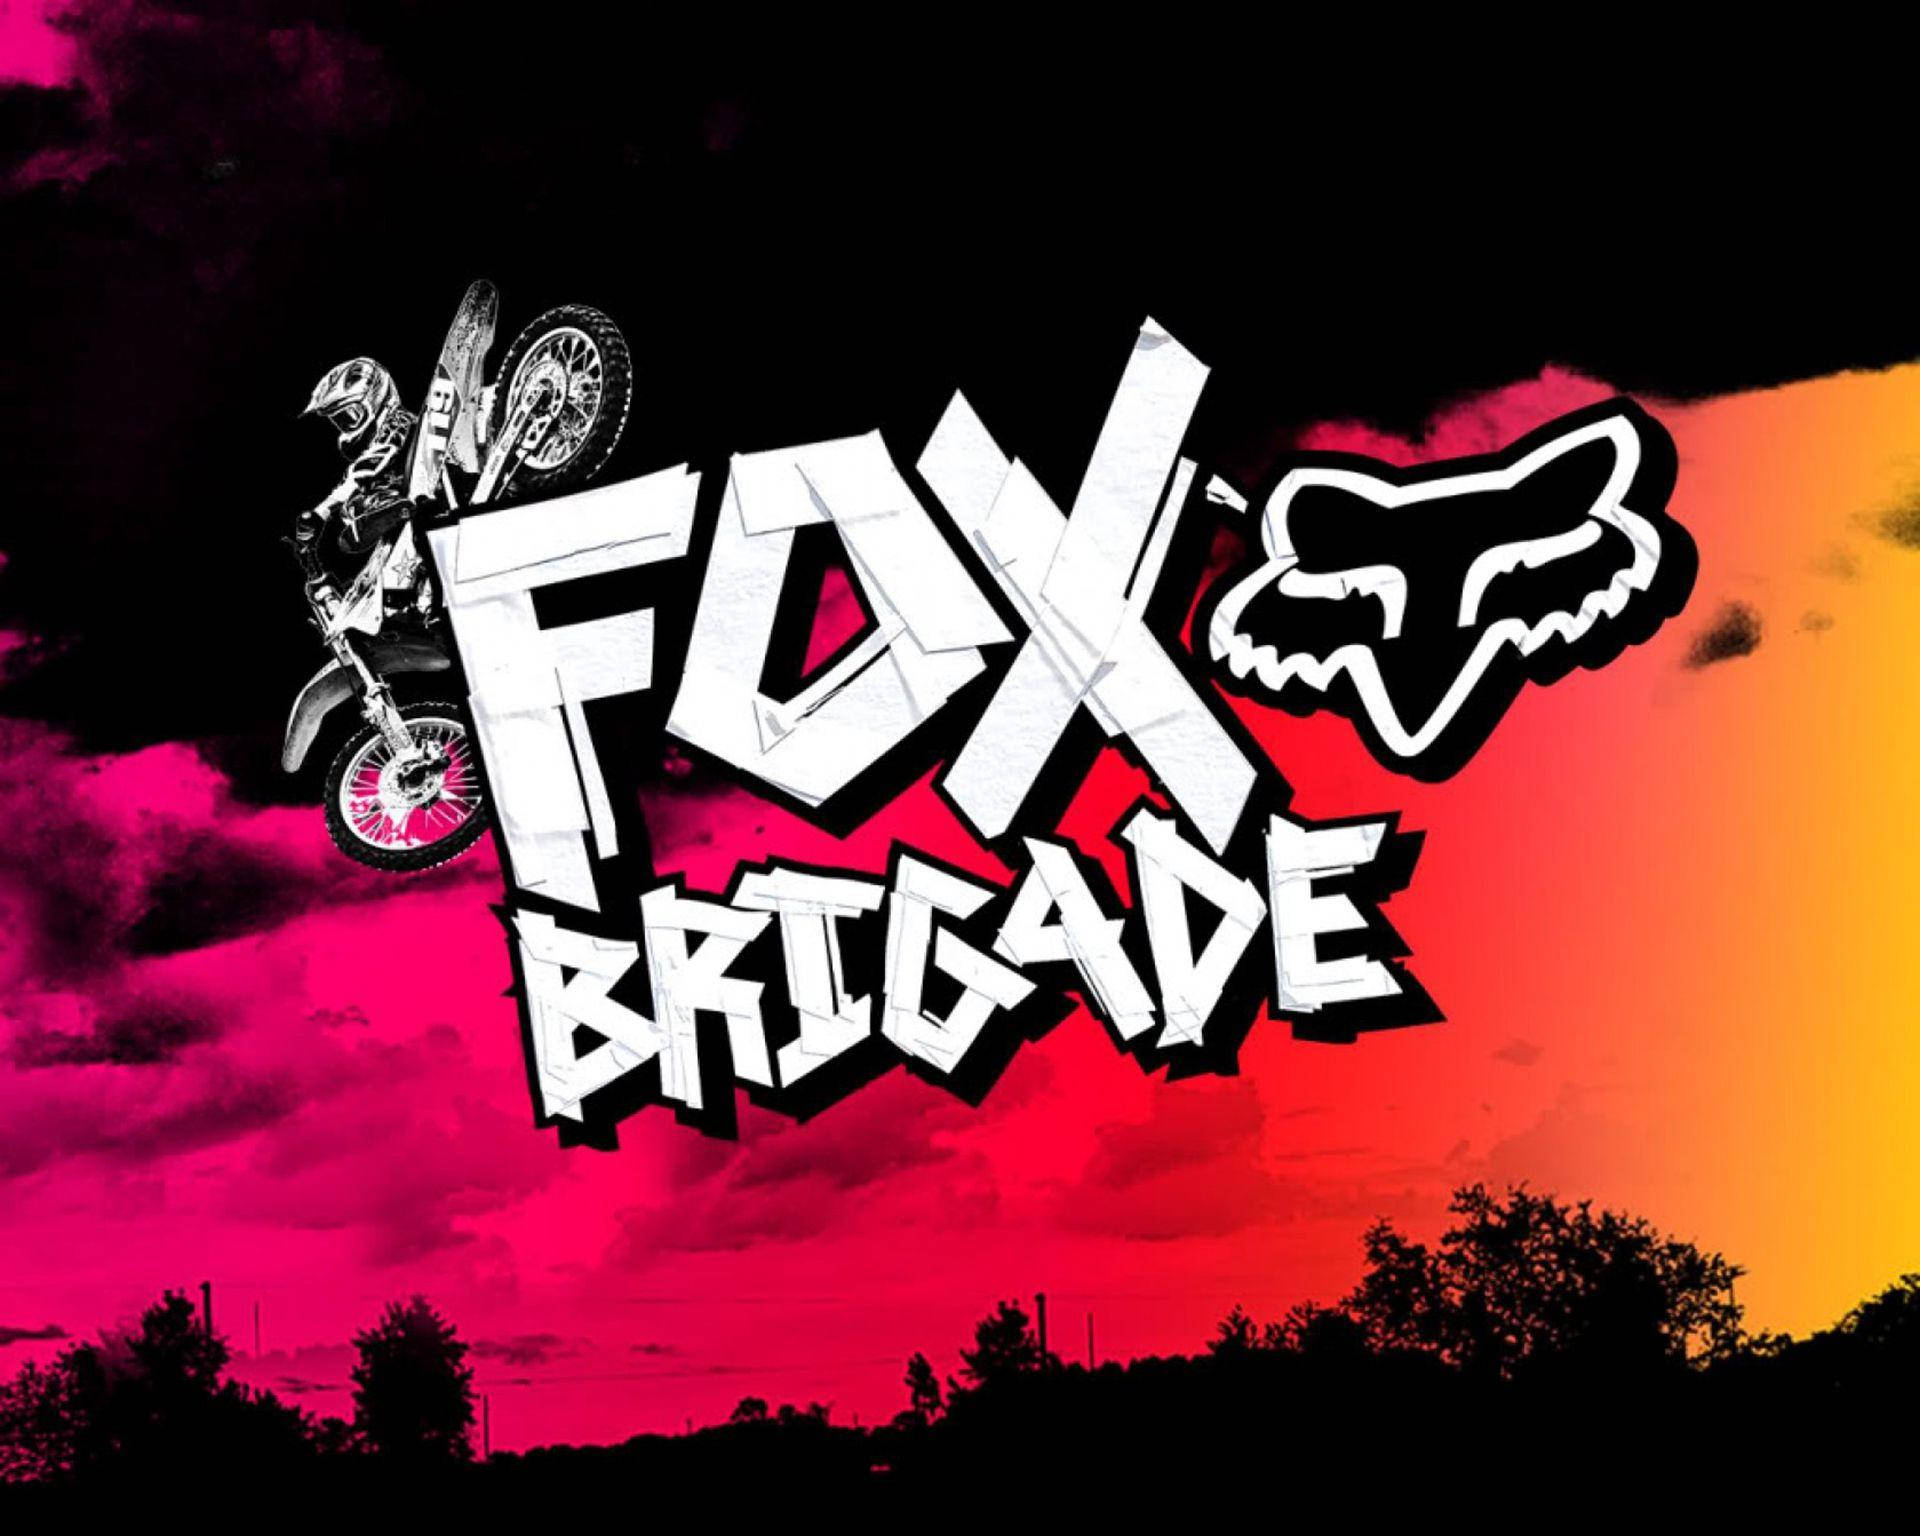 Fox Brigade Logo With A Motorcycle In The Background Wallpaper